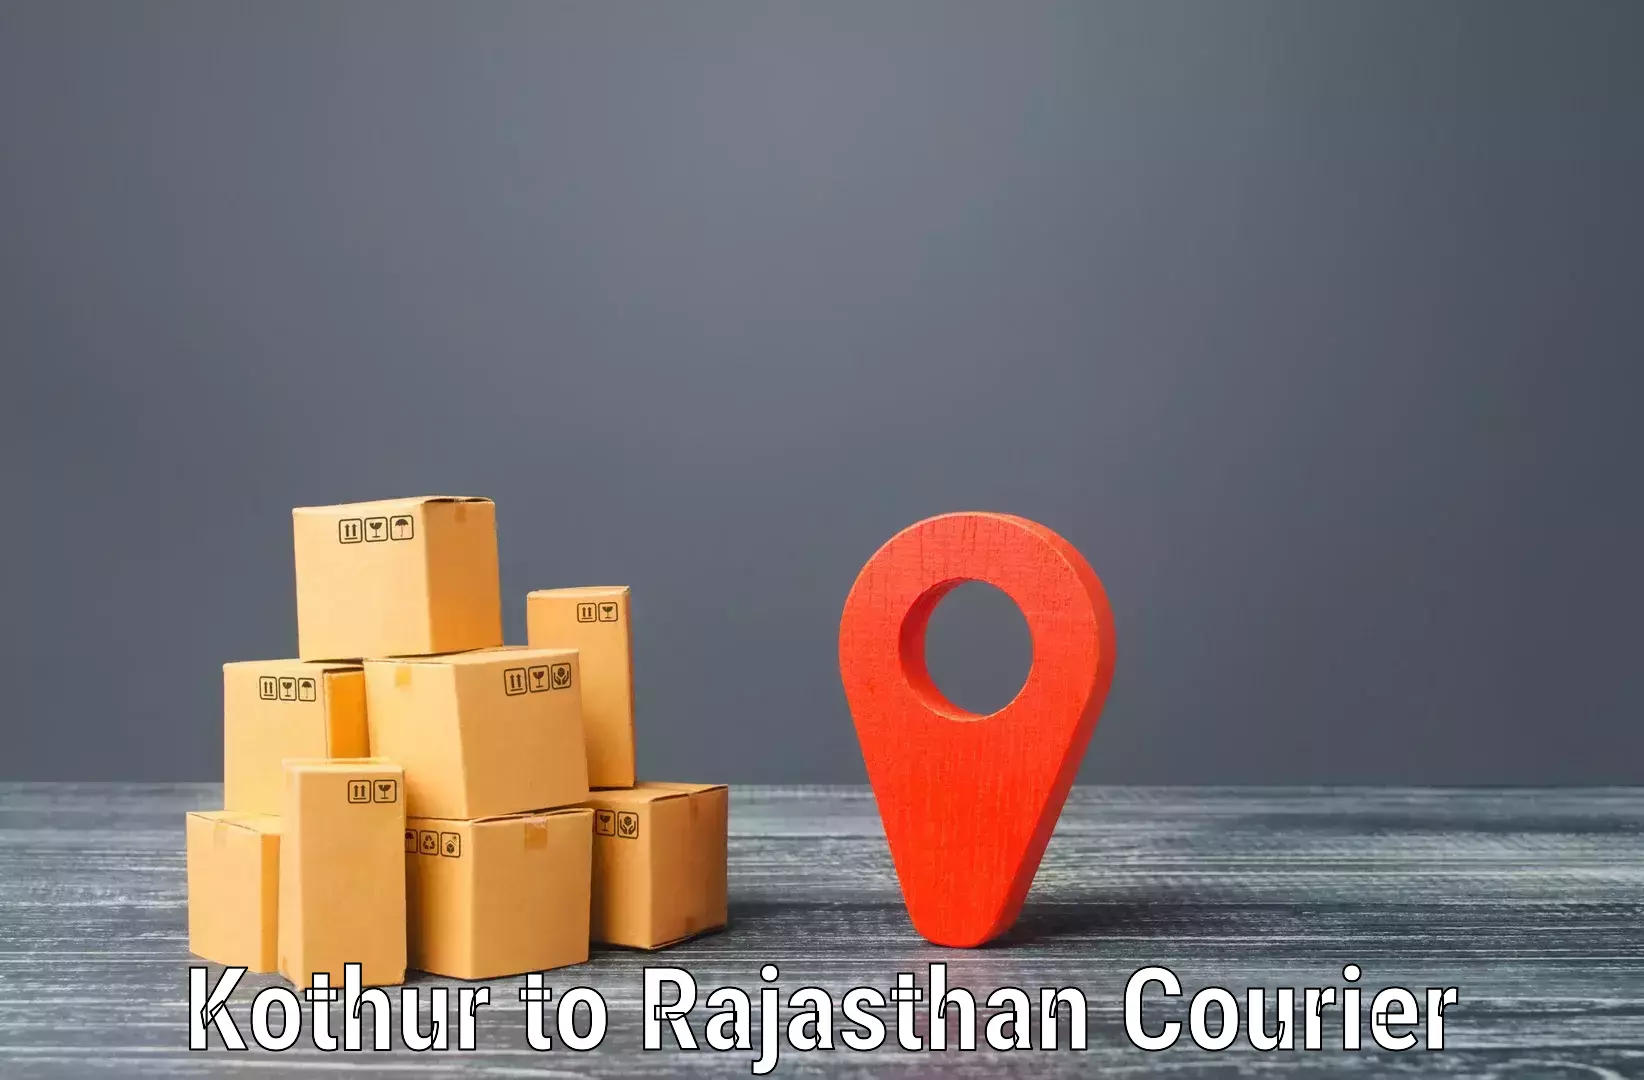 Nationwide delivery network in Kothur to Rajasthan